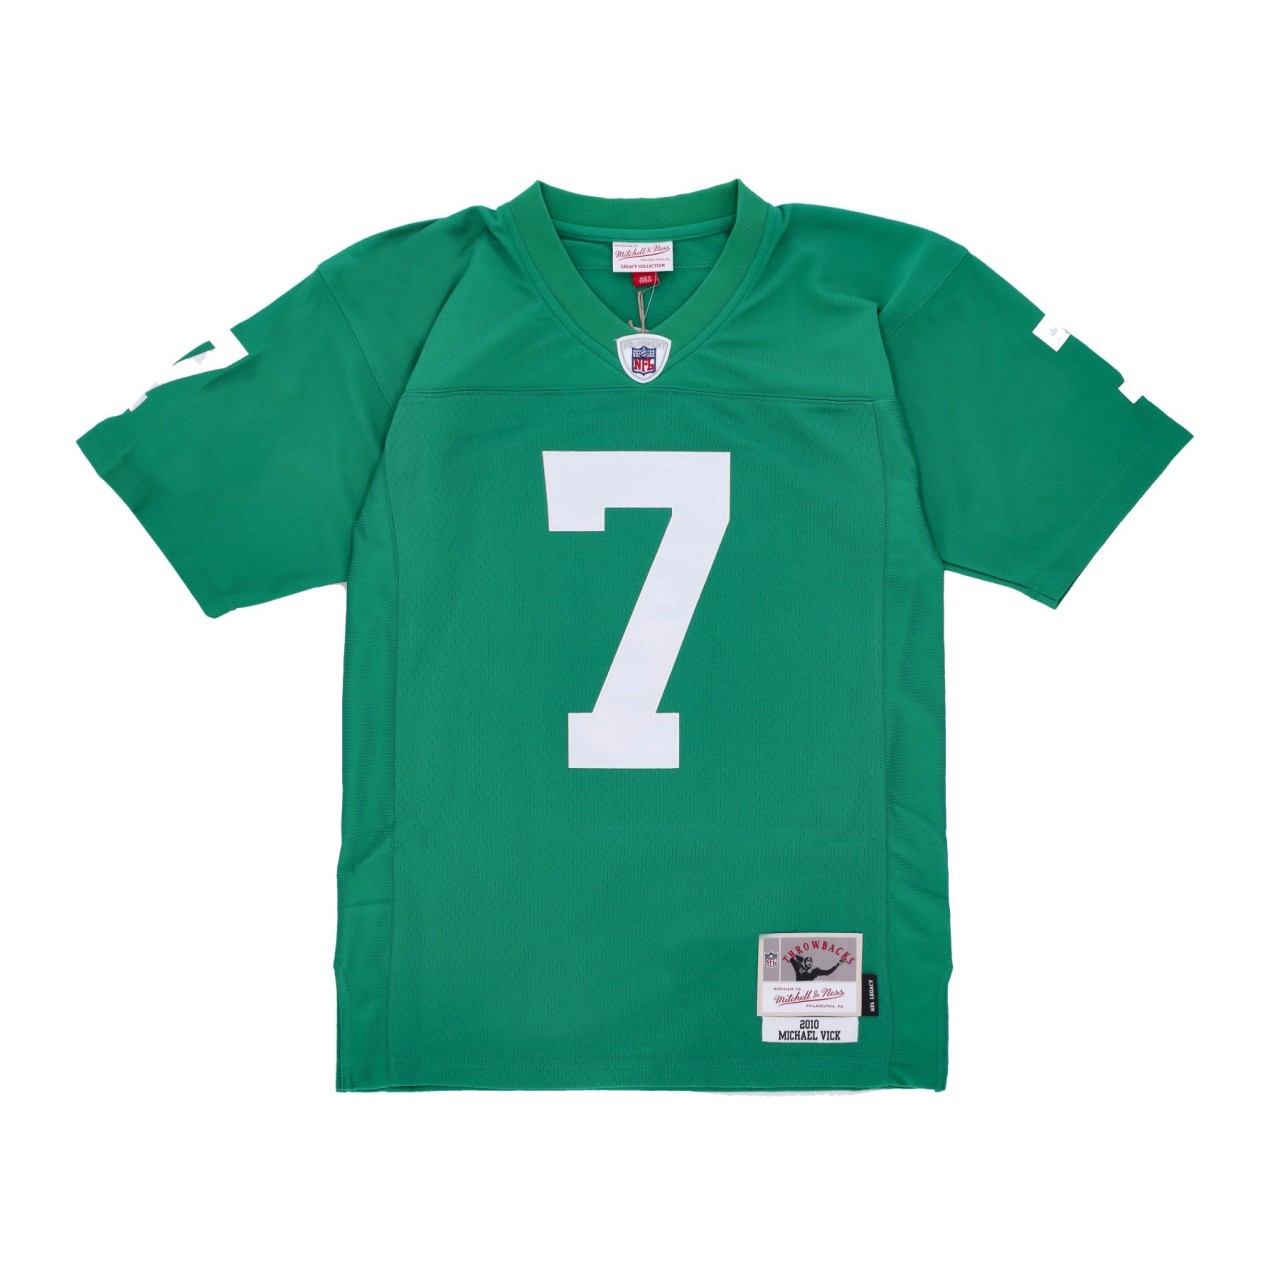 MITCHELL & NESS NFL THROWBACK JERSEY 2010 NO 7 VICK PHIEAG LGJY6213-PEA10MVCKYGN